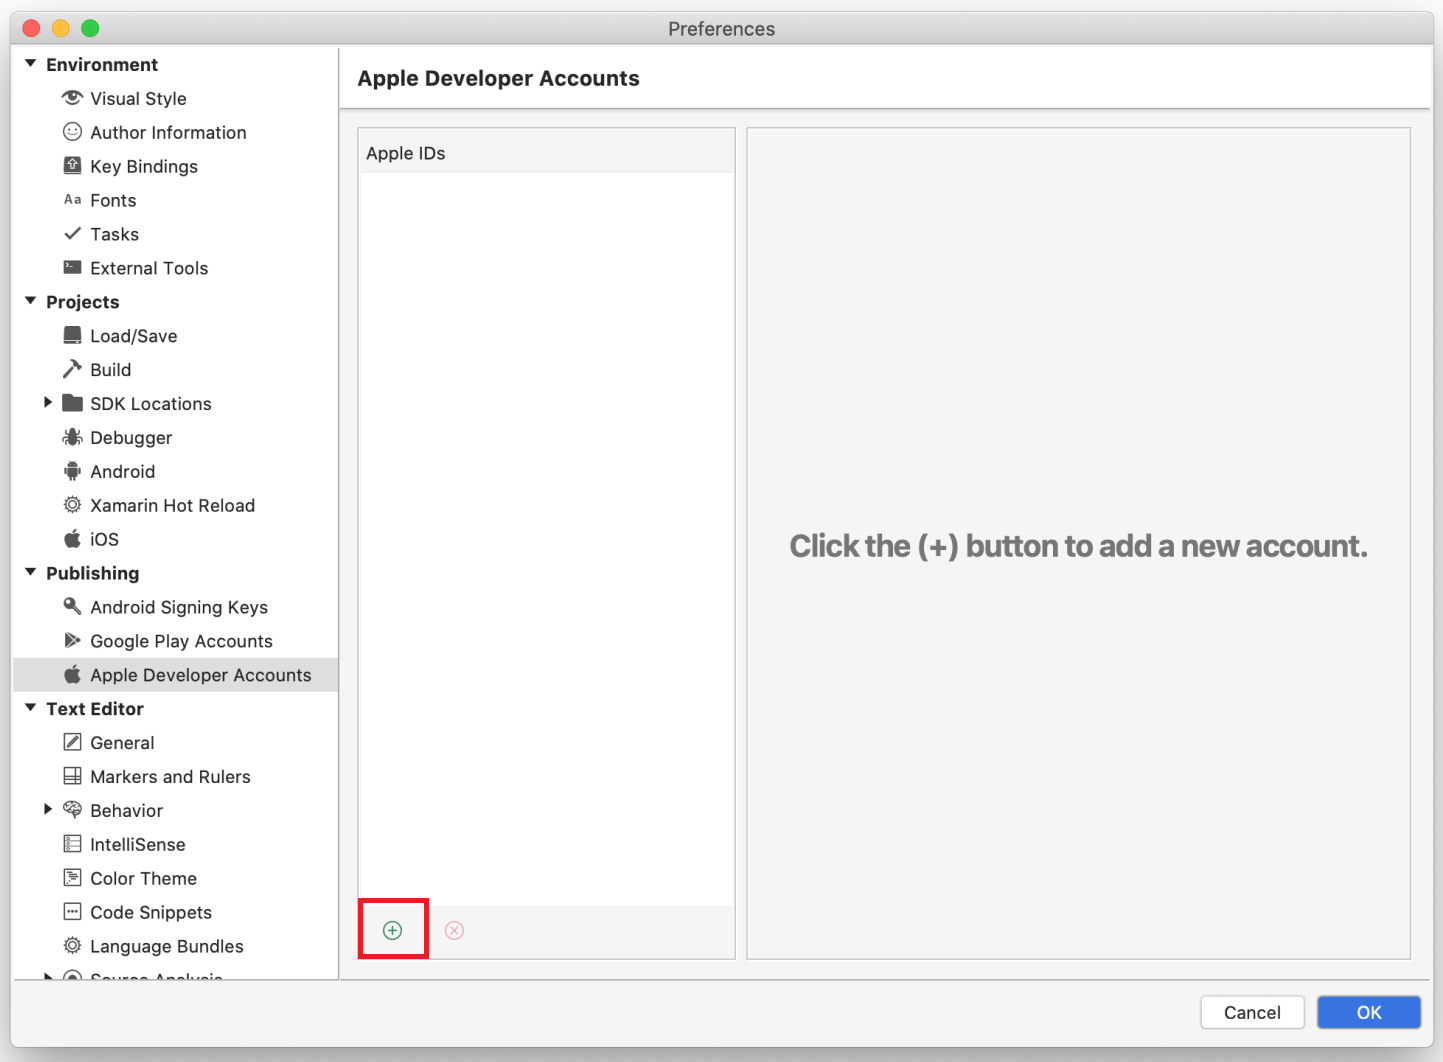 AScreenshot of Apple developer accounts page in Visual Studio for Mac preferences.